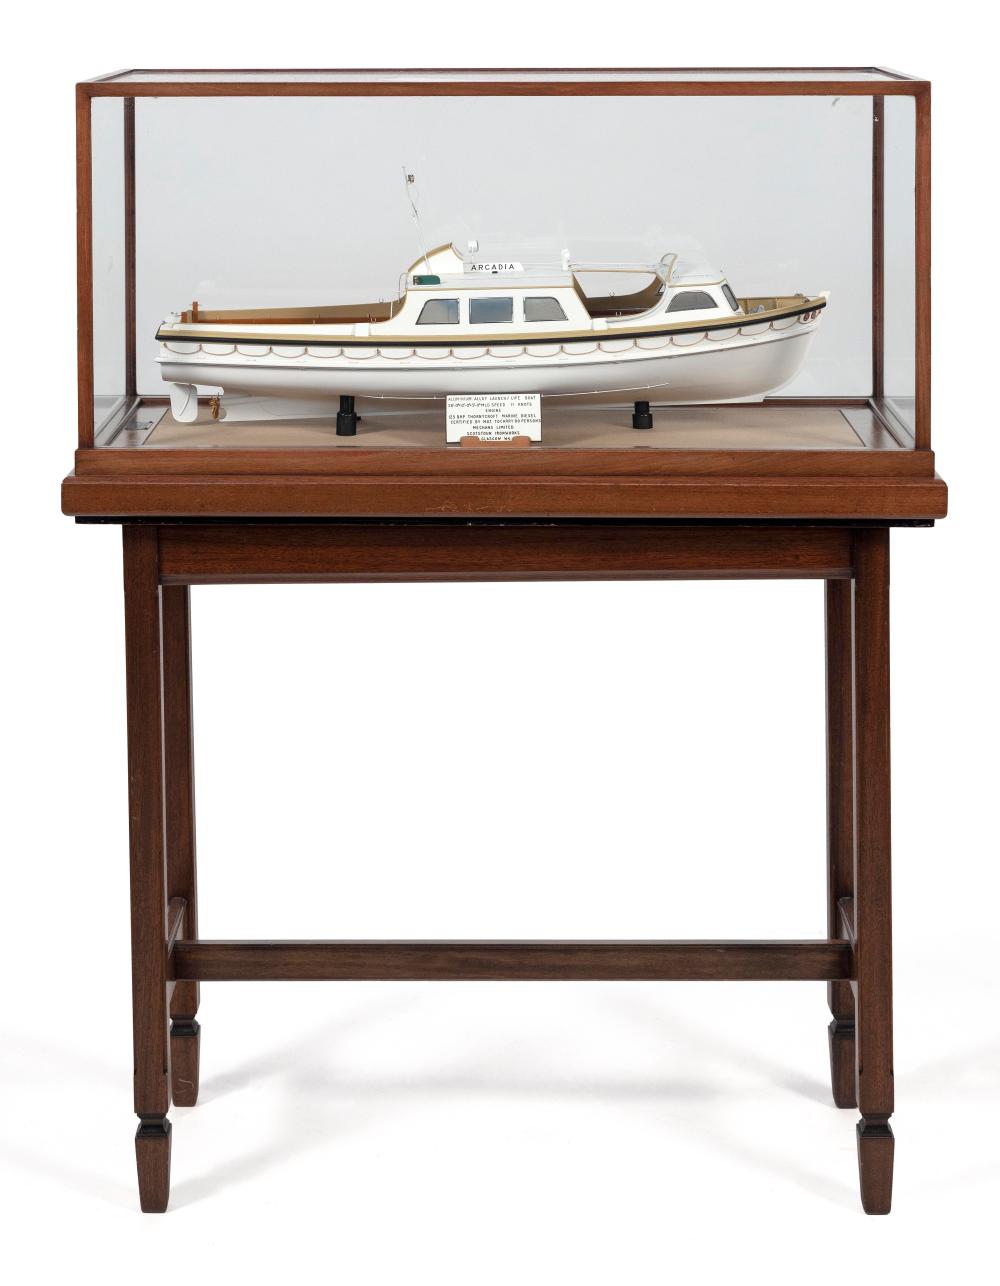 CASED MODEL OF THE LAUNCH "ARCADIA"